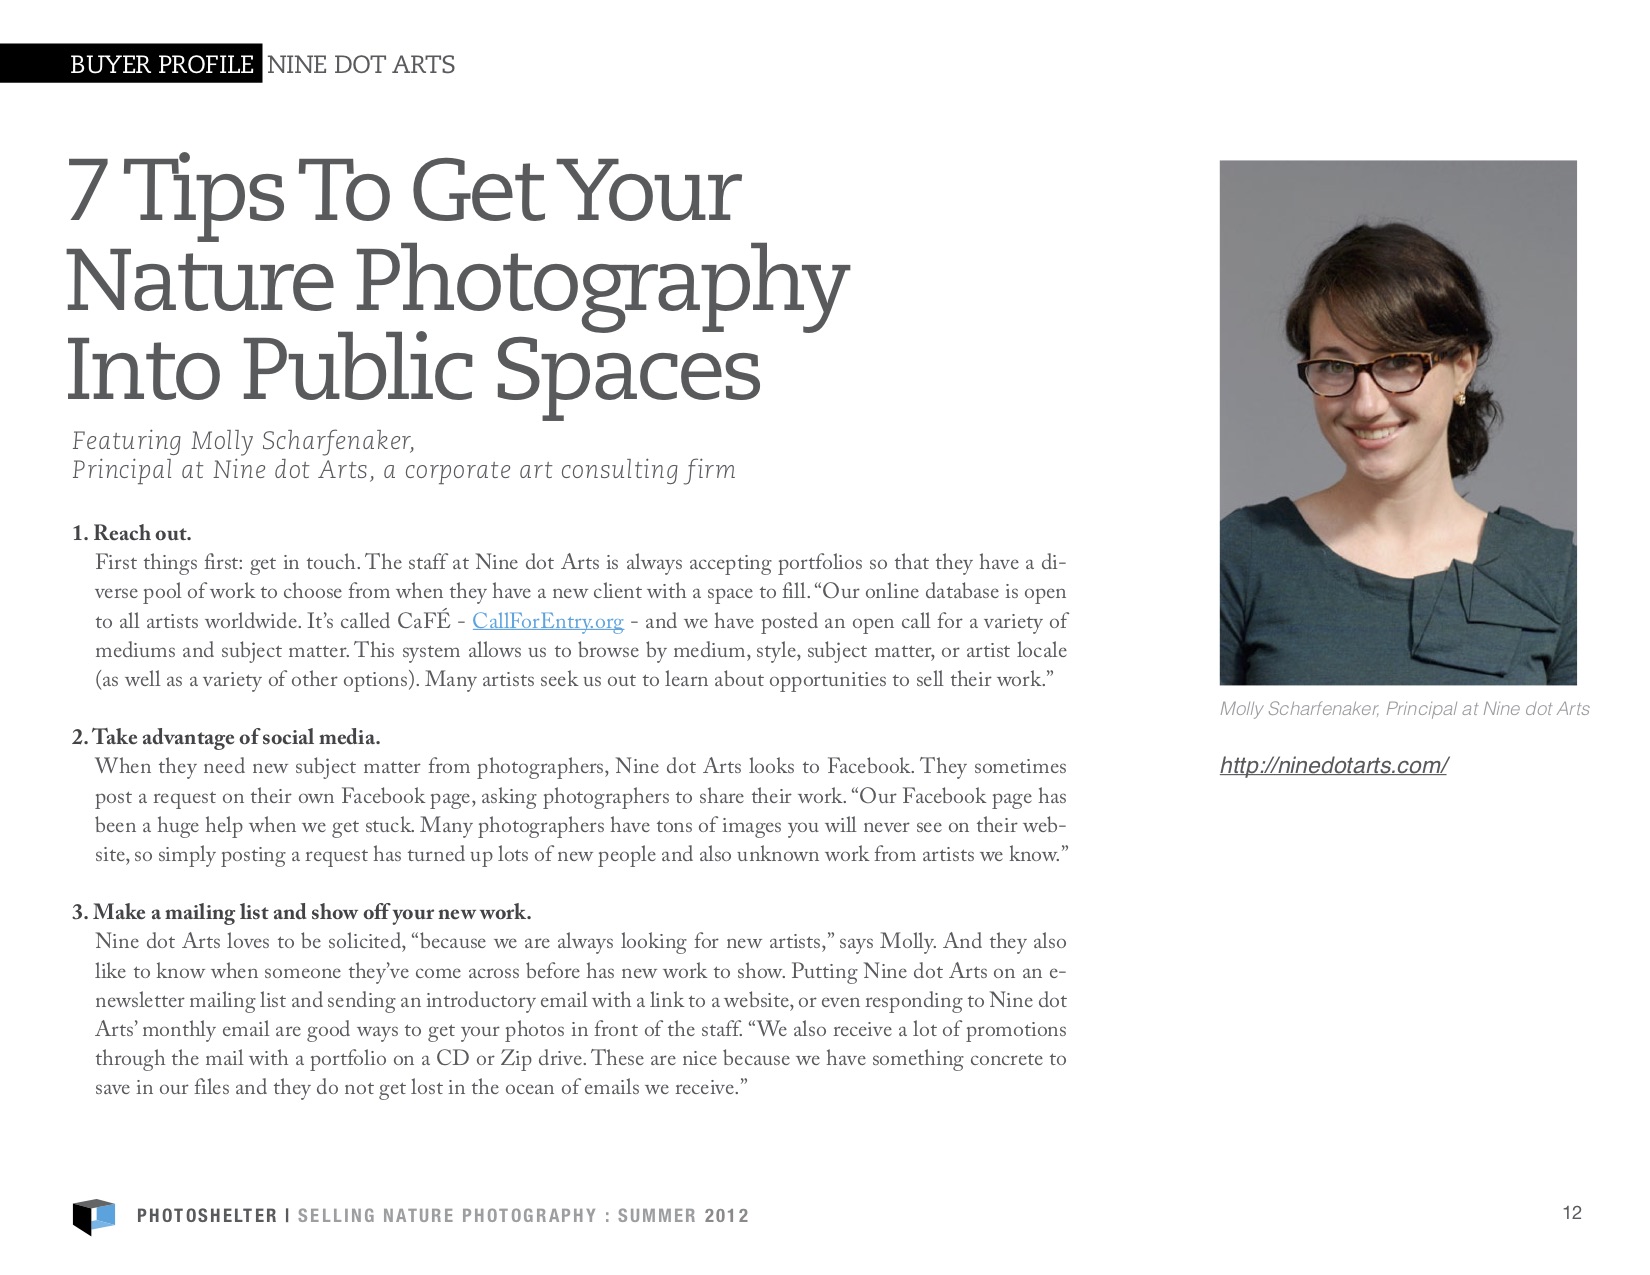 An article covering 7 tips to get your nature photography into public spaces. To the right of the article is a photo of Molly Scharfenaker.